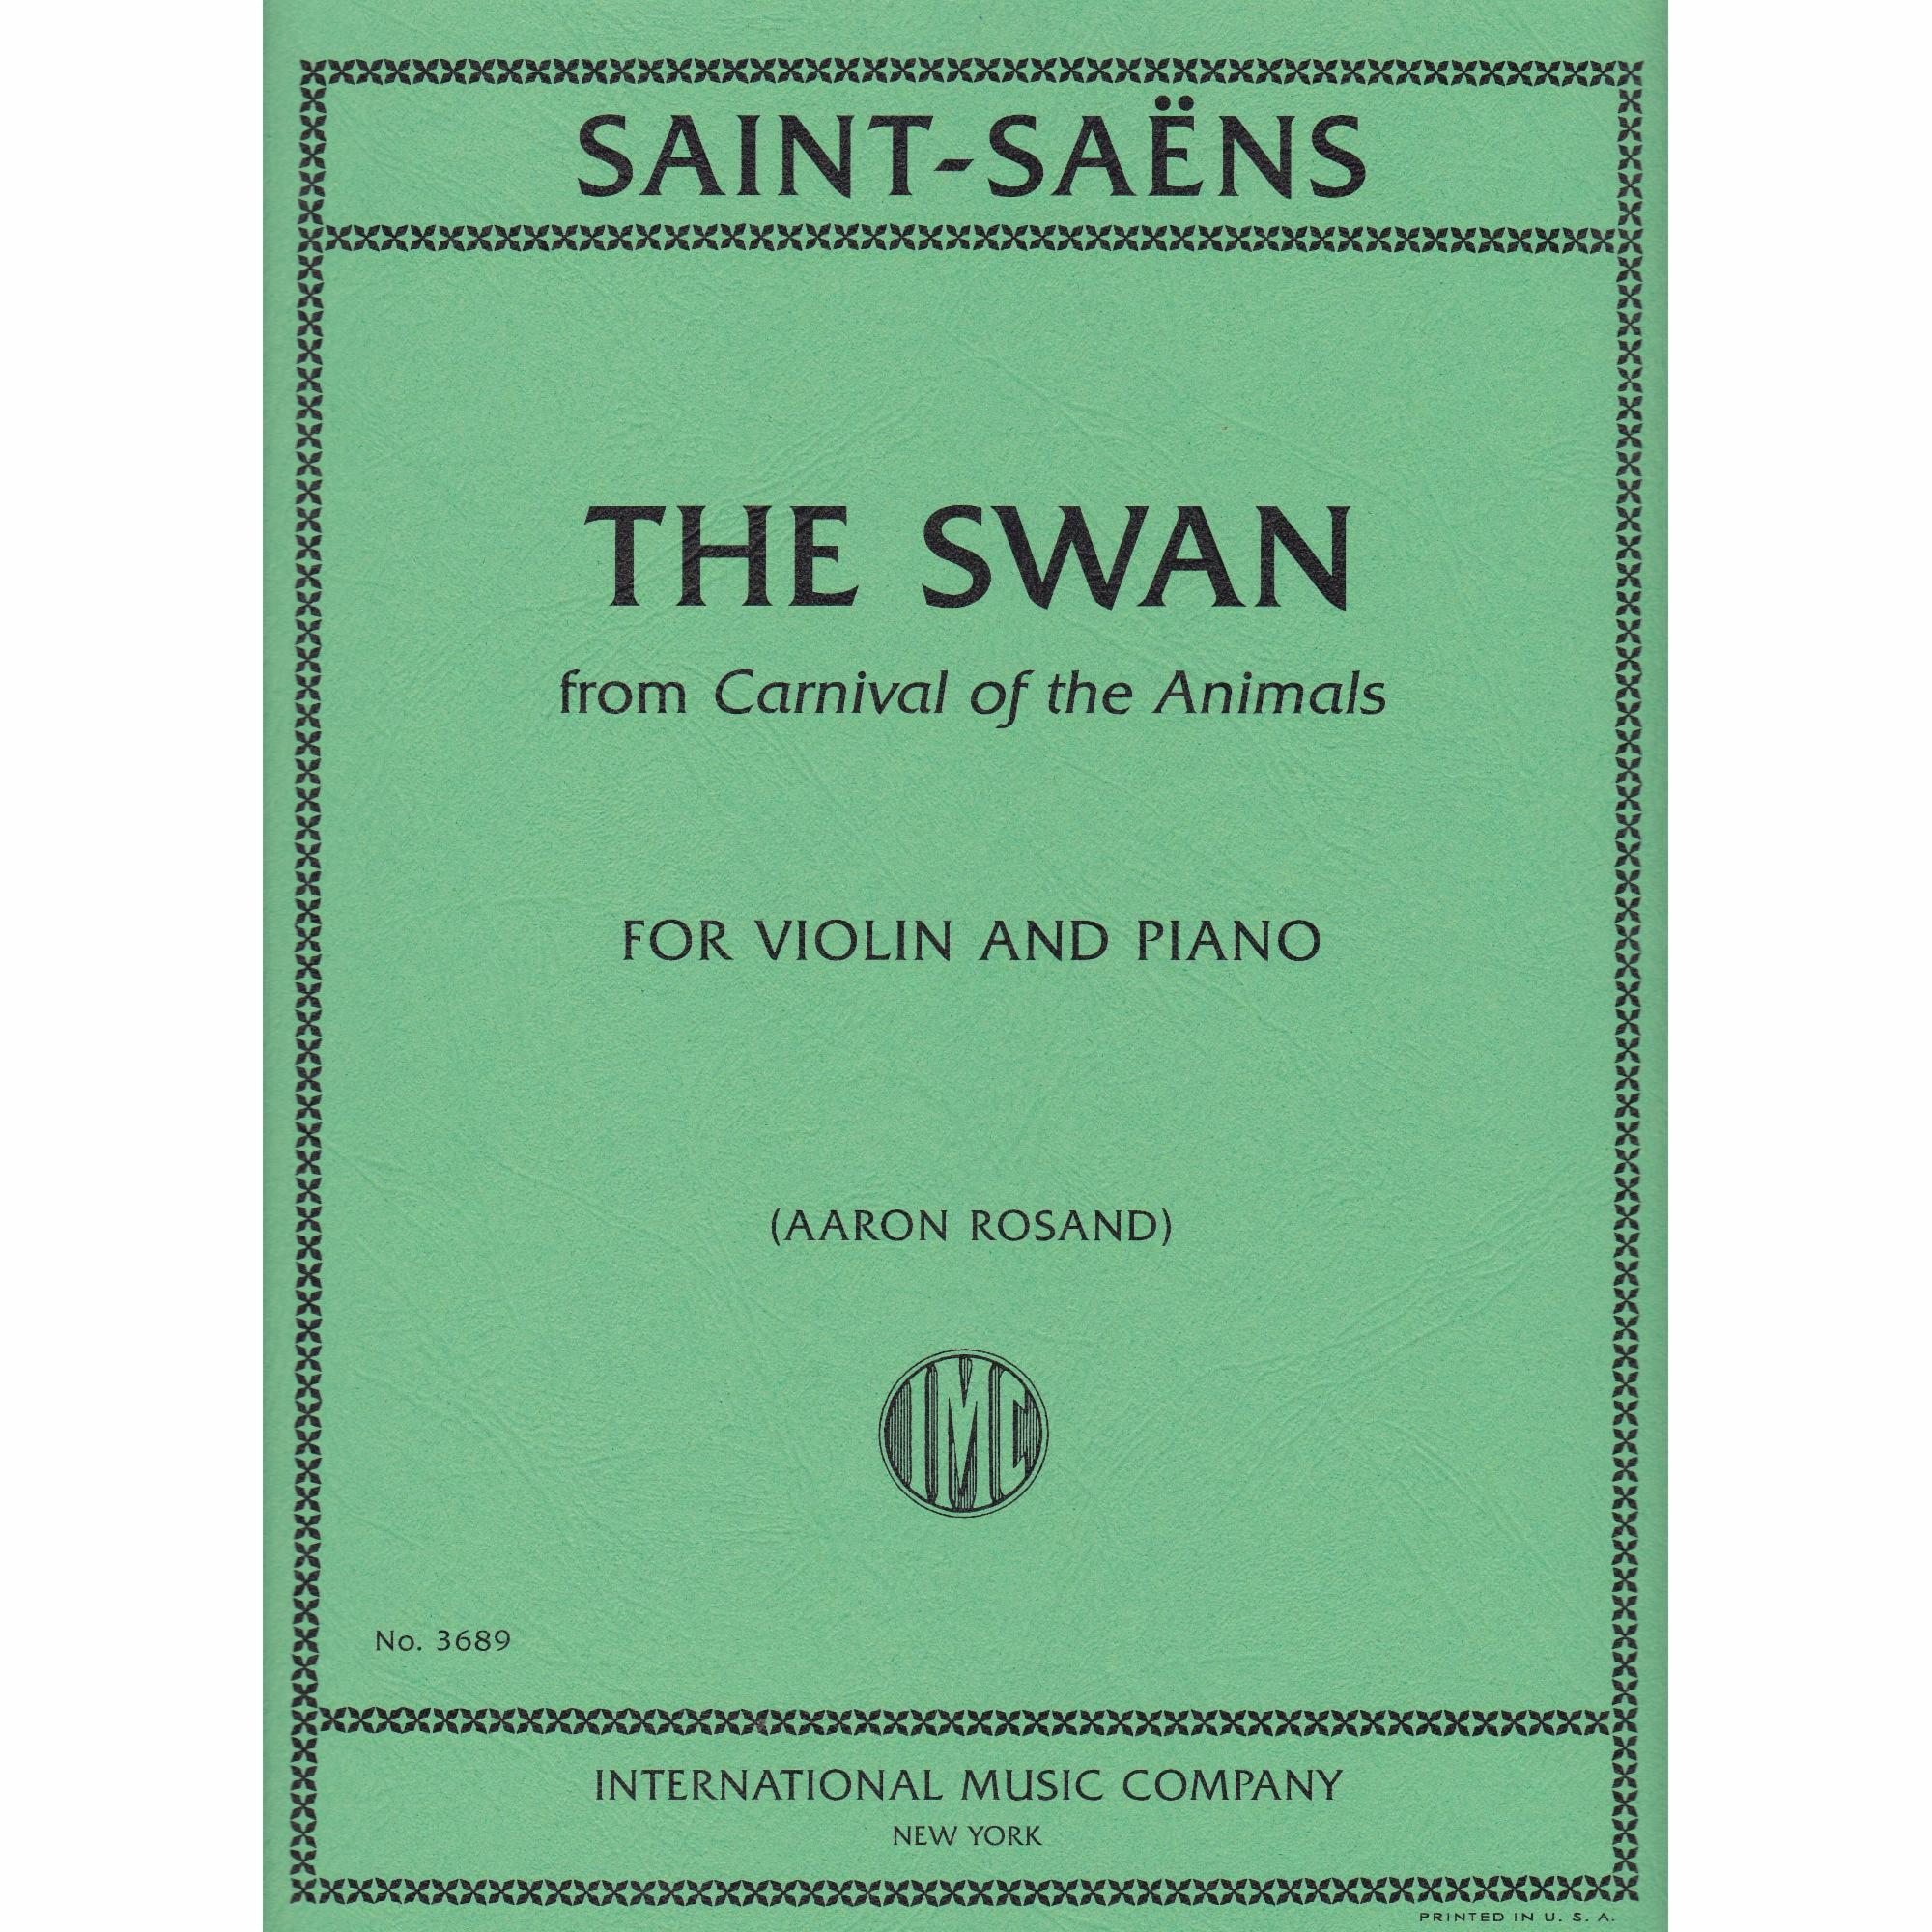 The Swan for Violin and Piano